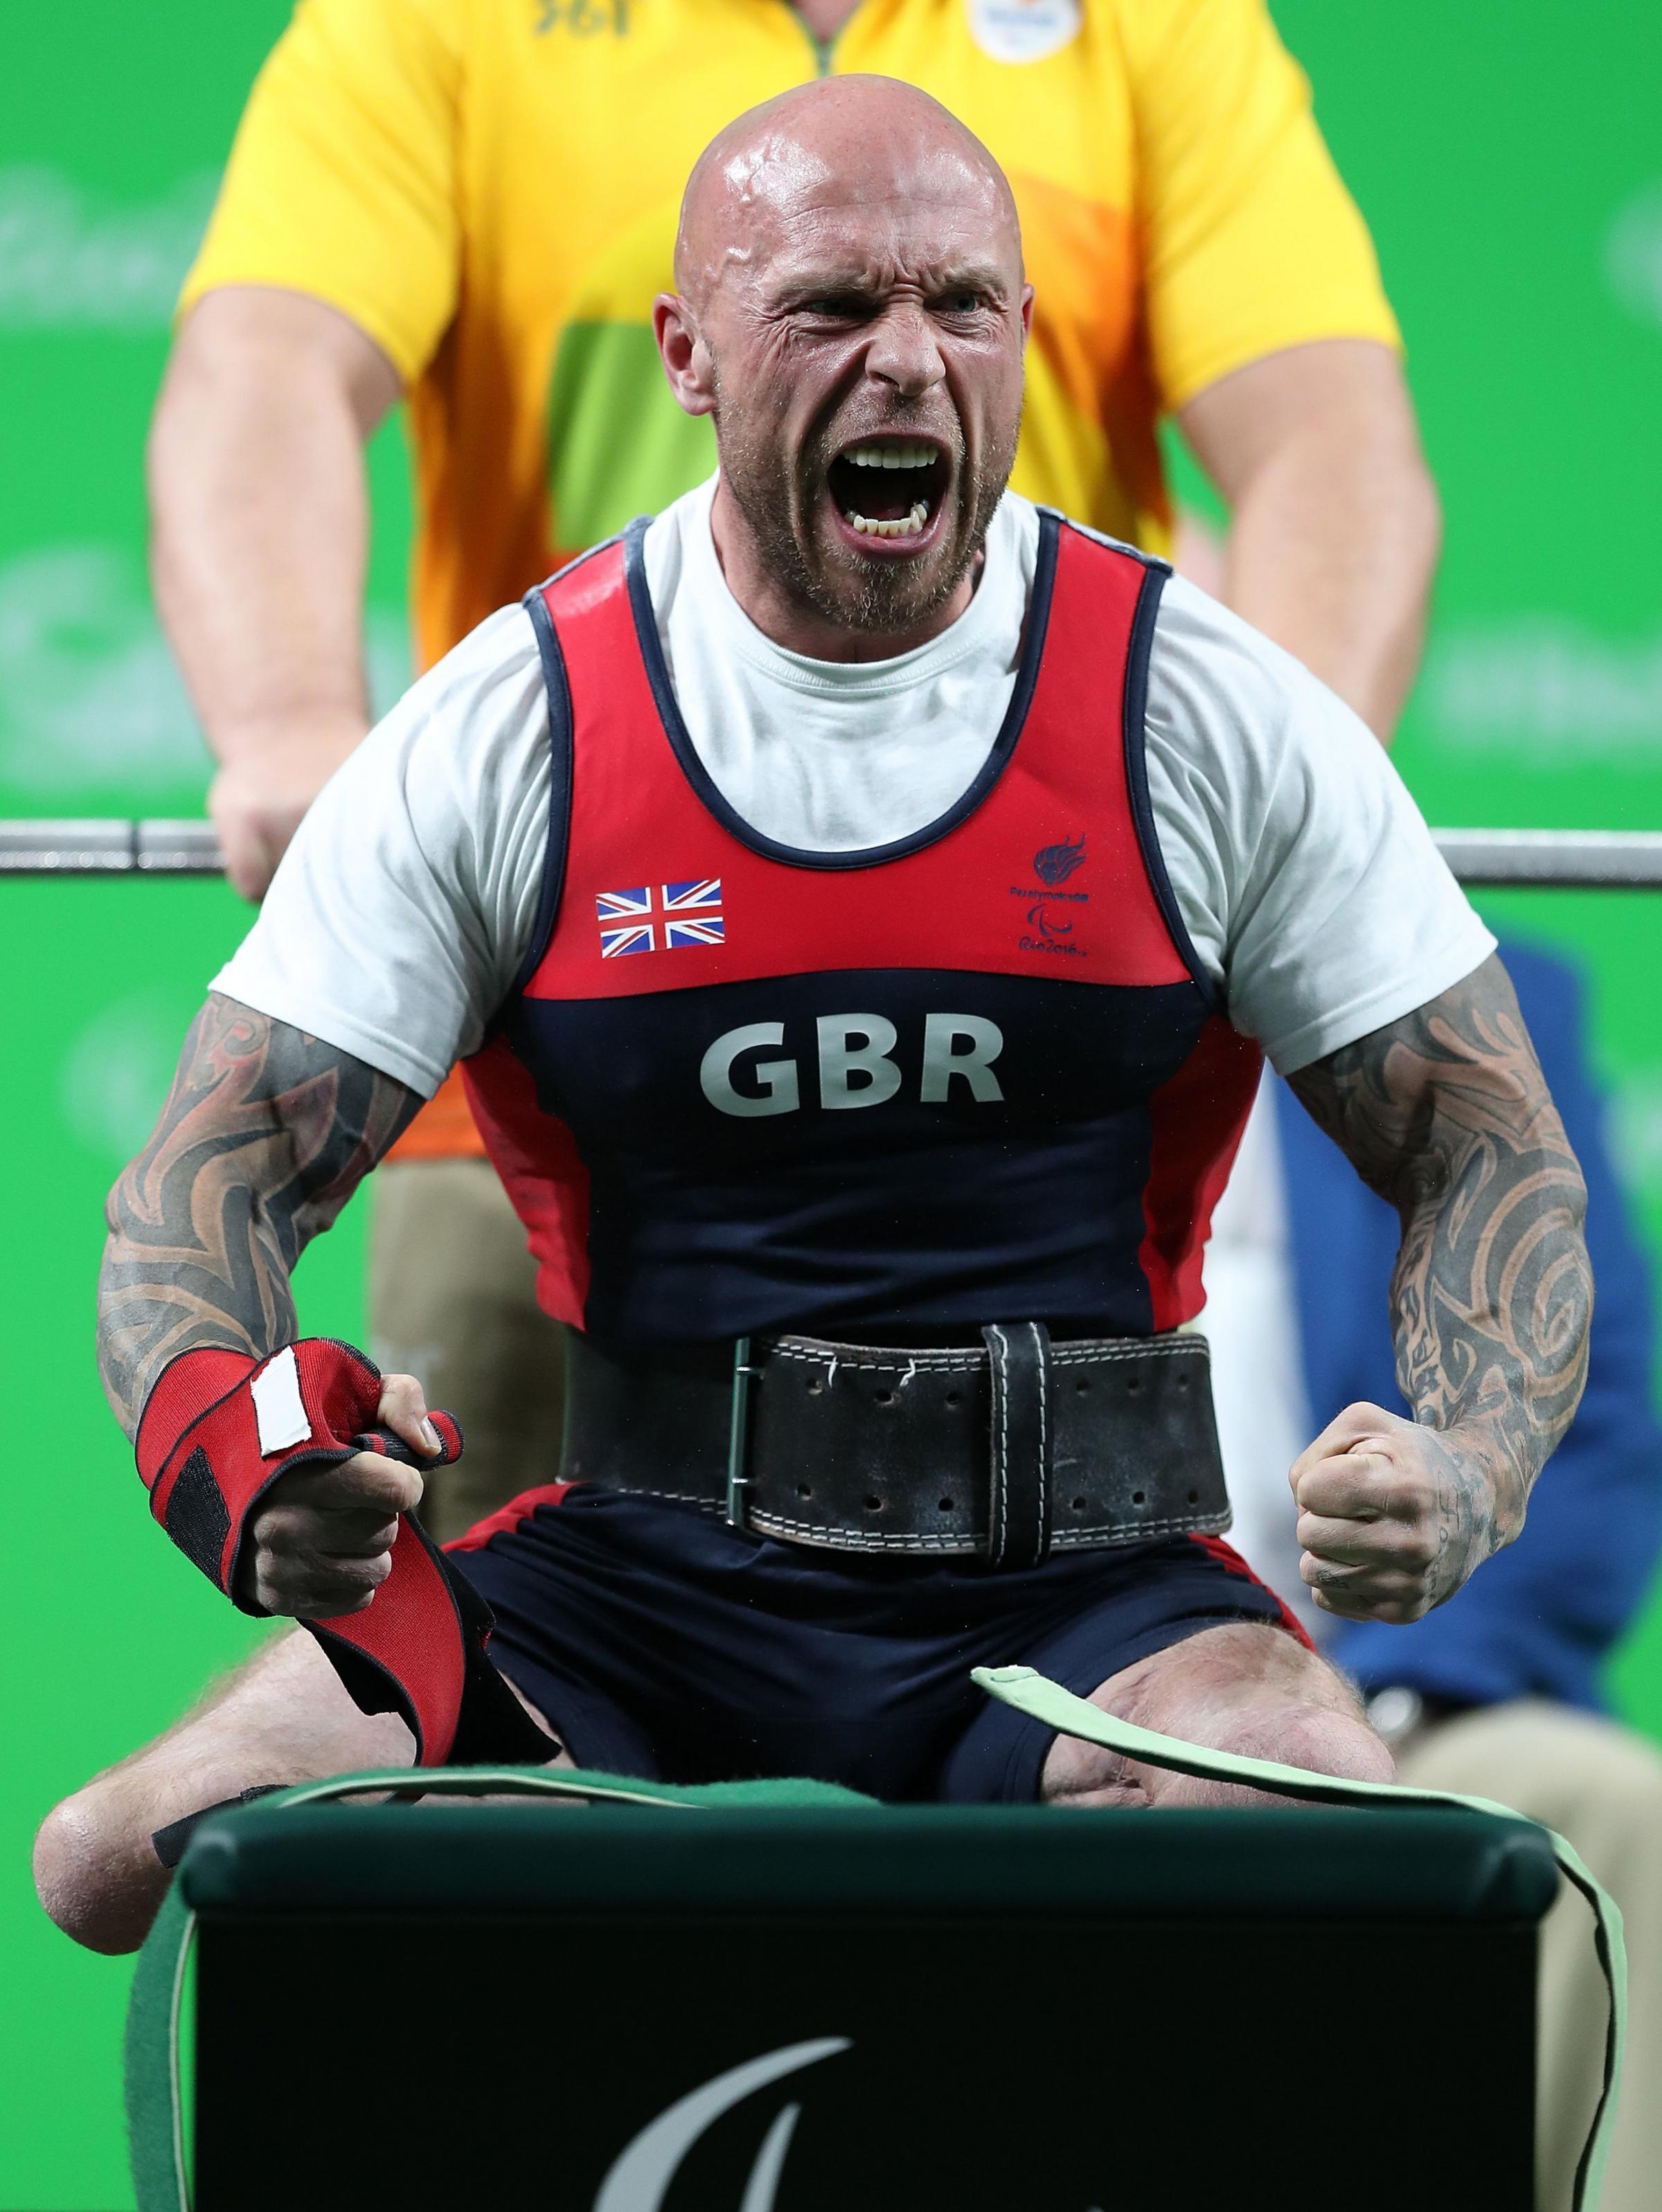 County powerlifter Micky Yule at the Rio Olympics. Pic Andrew Matthews/PA Wire.